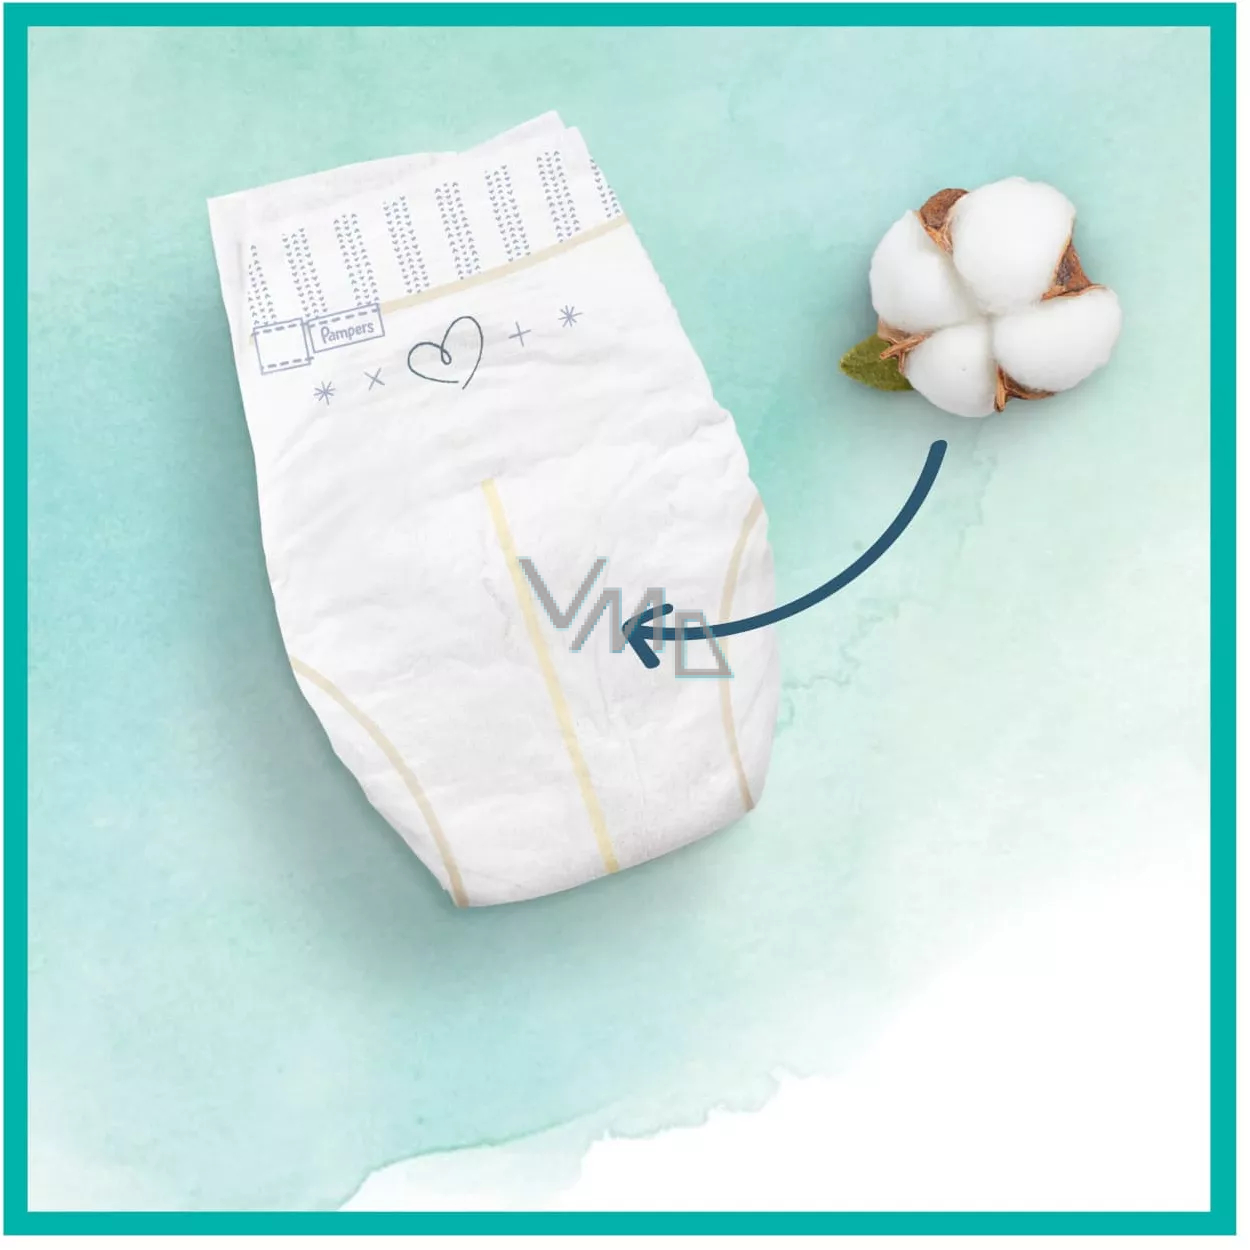 Pampers Harmony Hybrid trial pack - 1 washable diaper and 15 disposable top  sheets Provides your little one with optimal protection!